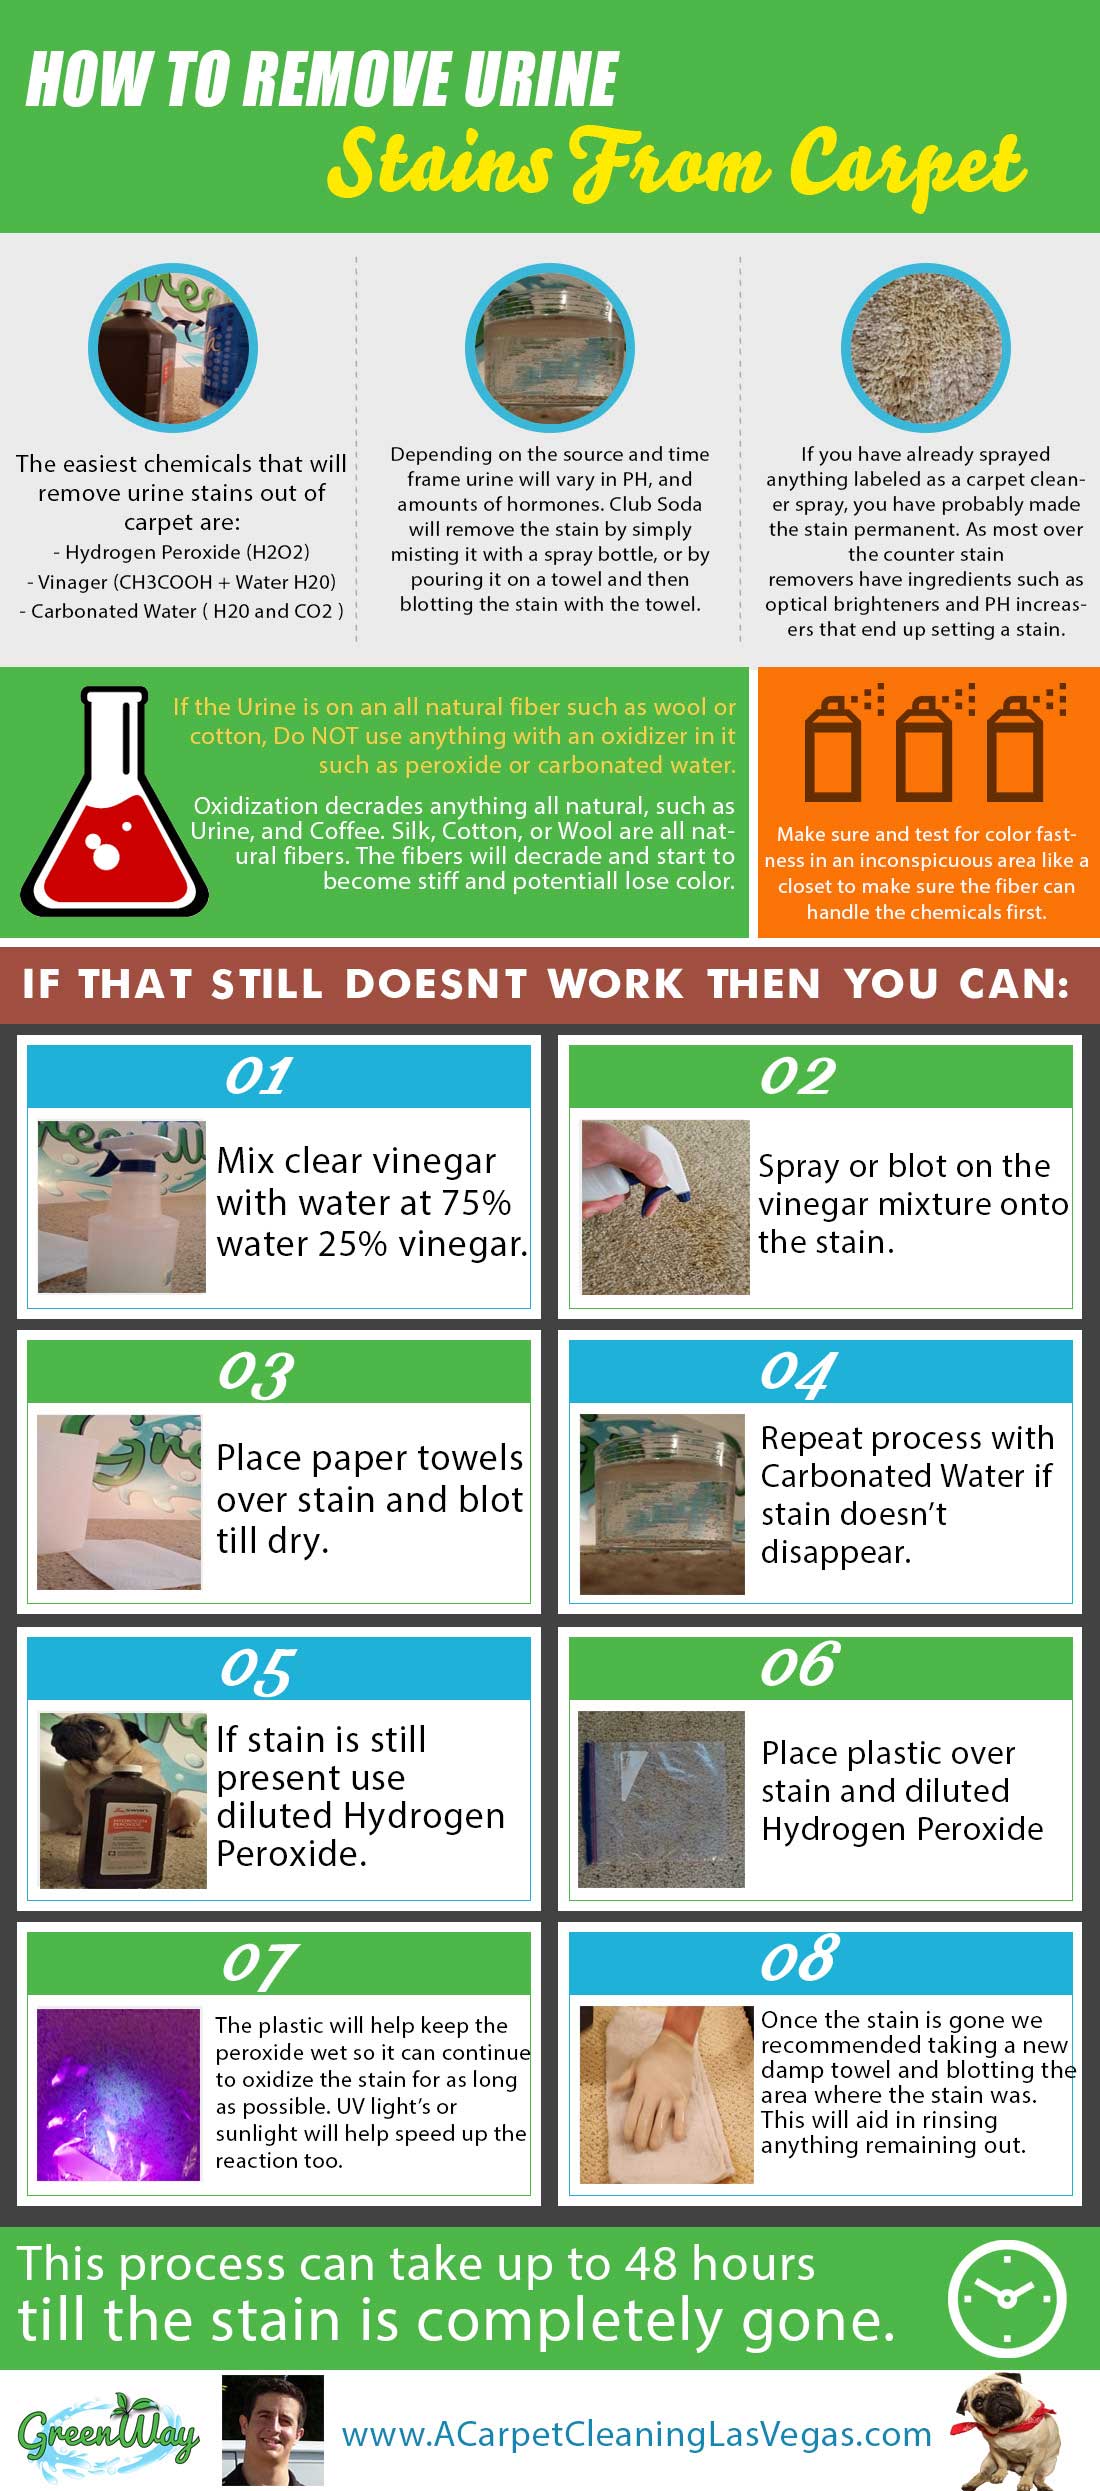 How to Remove Urine Stains from Carpet